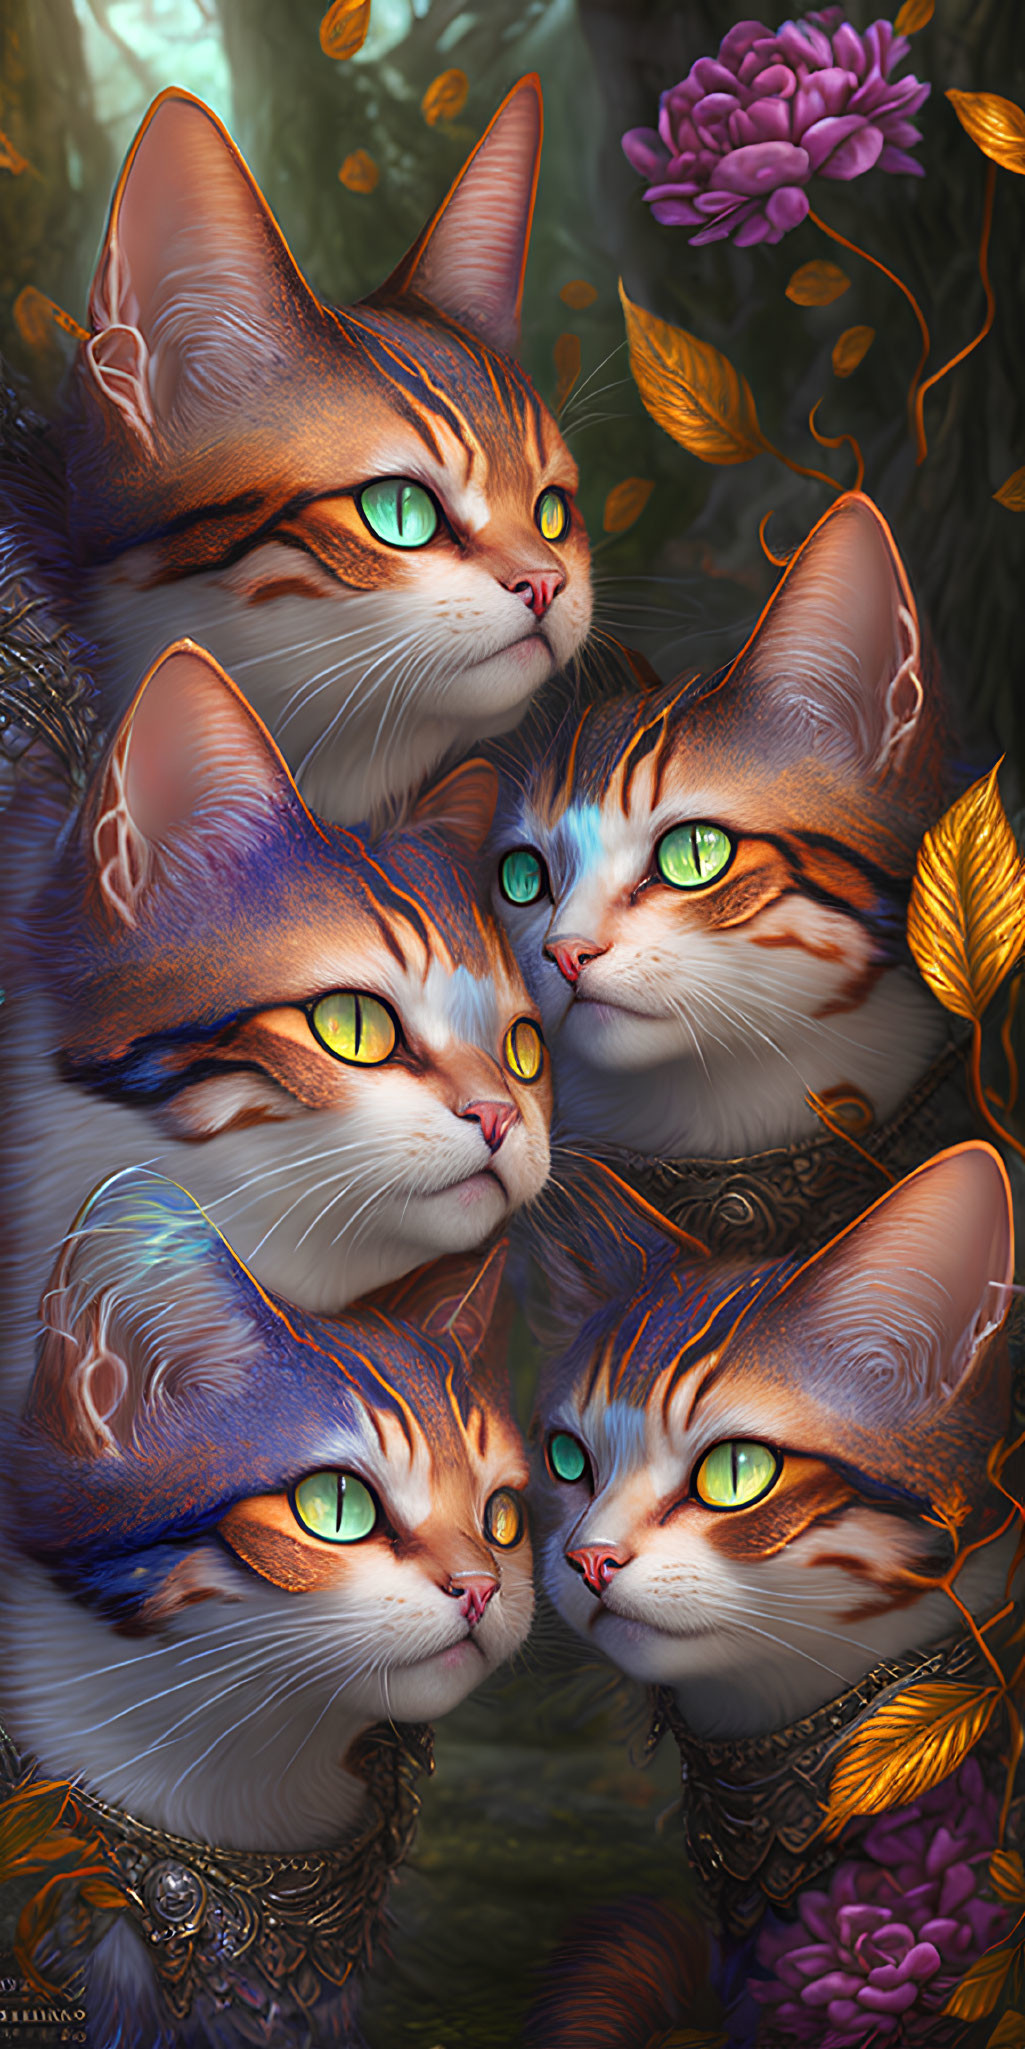 Intricately Detailed Fantastical Cats with Vibrant Eyes and Patterned Fur